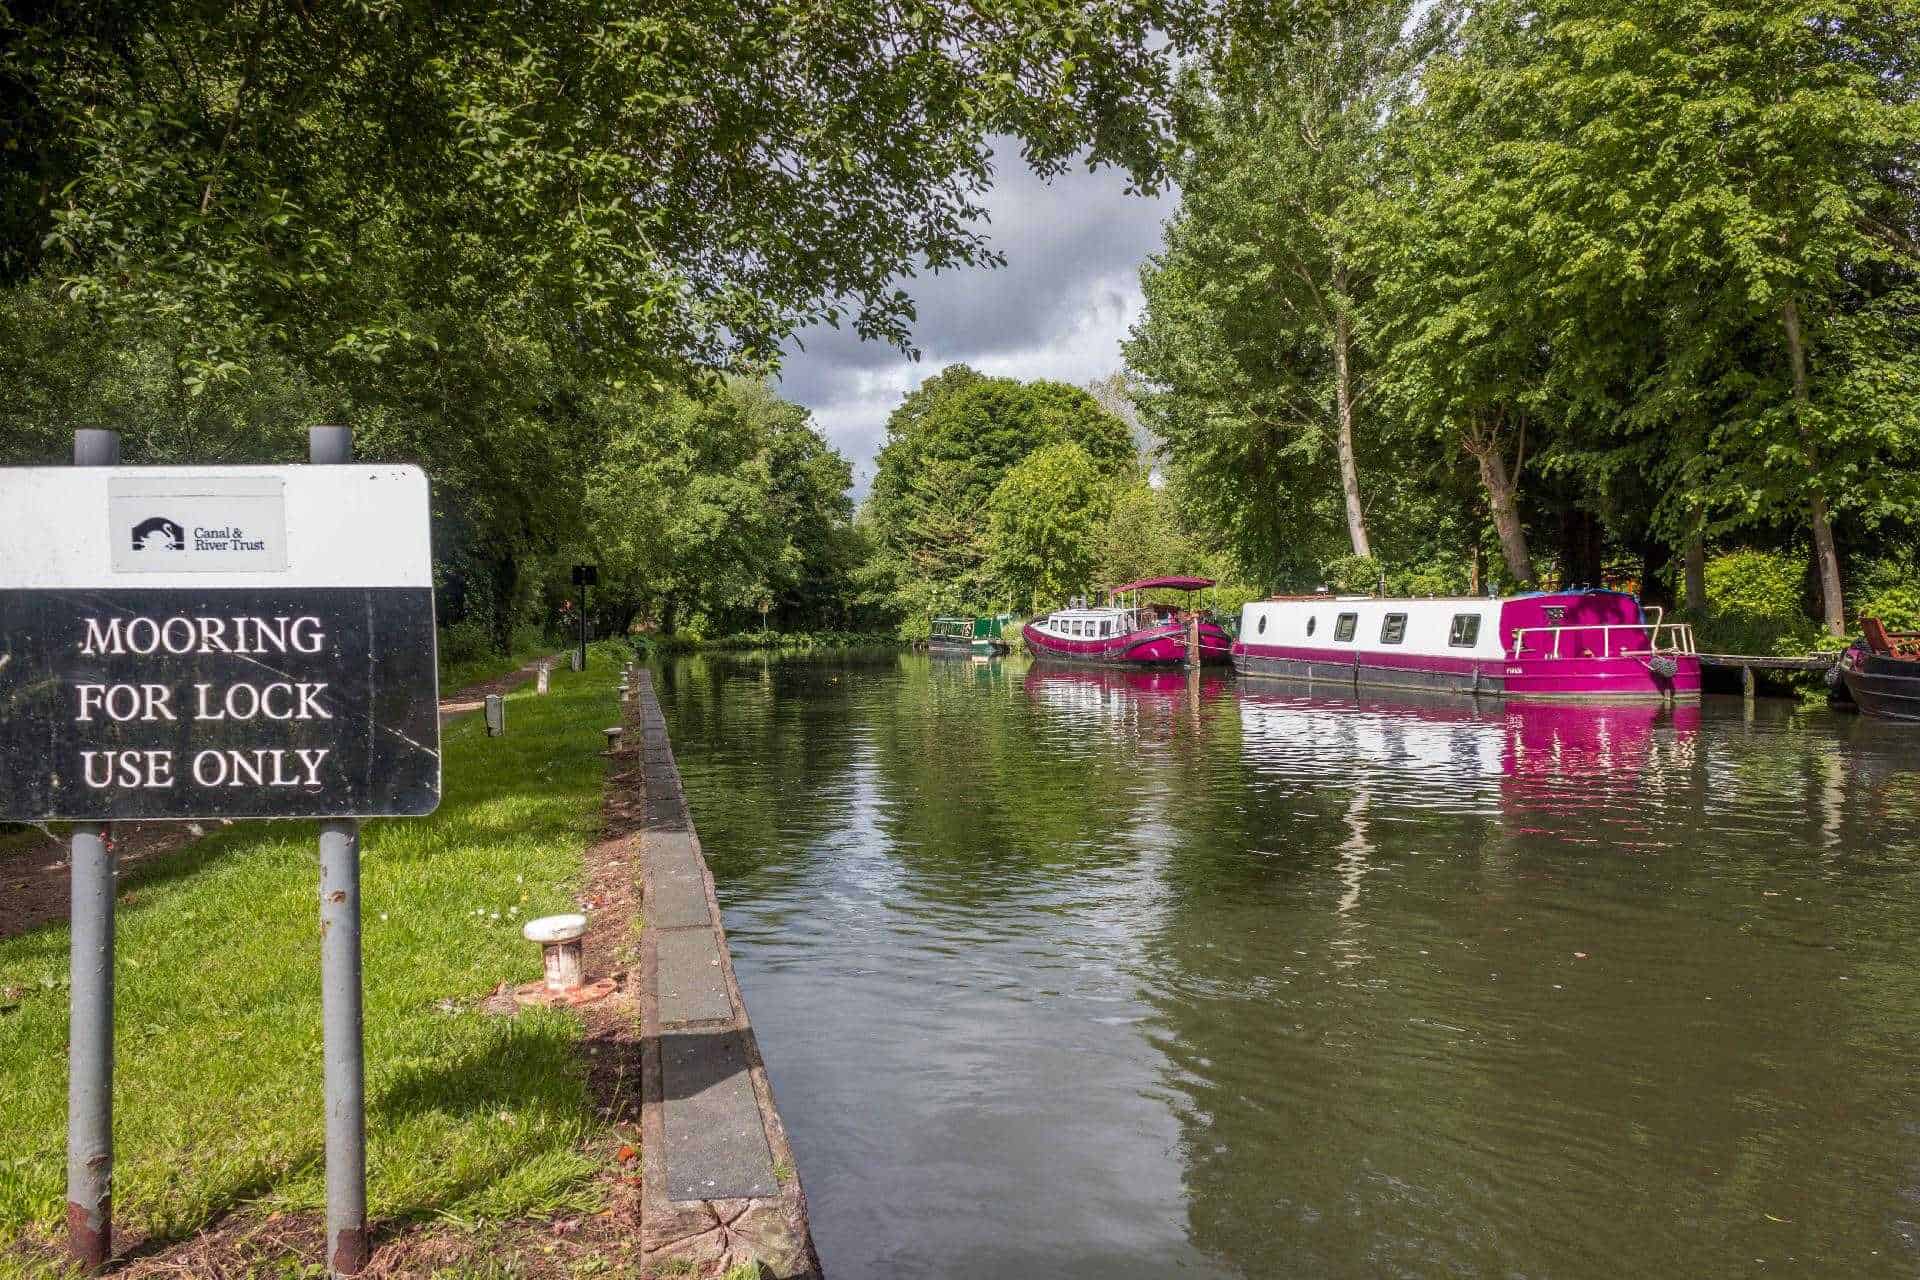 Can You Moor A Canal Boat Anywhere?